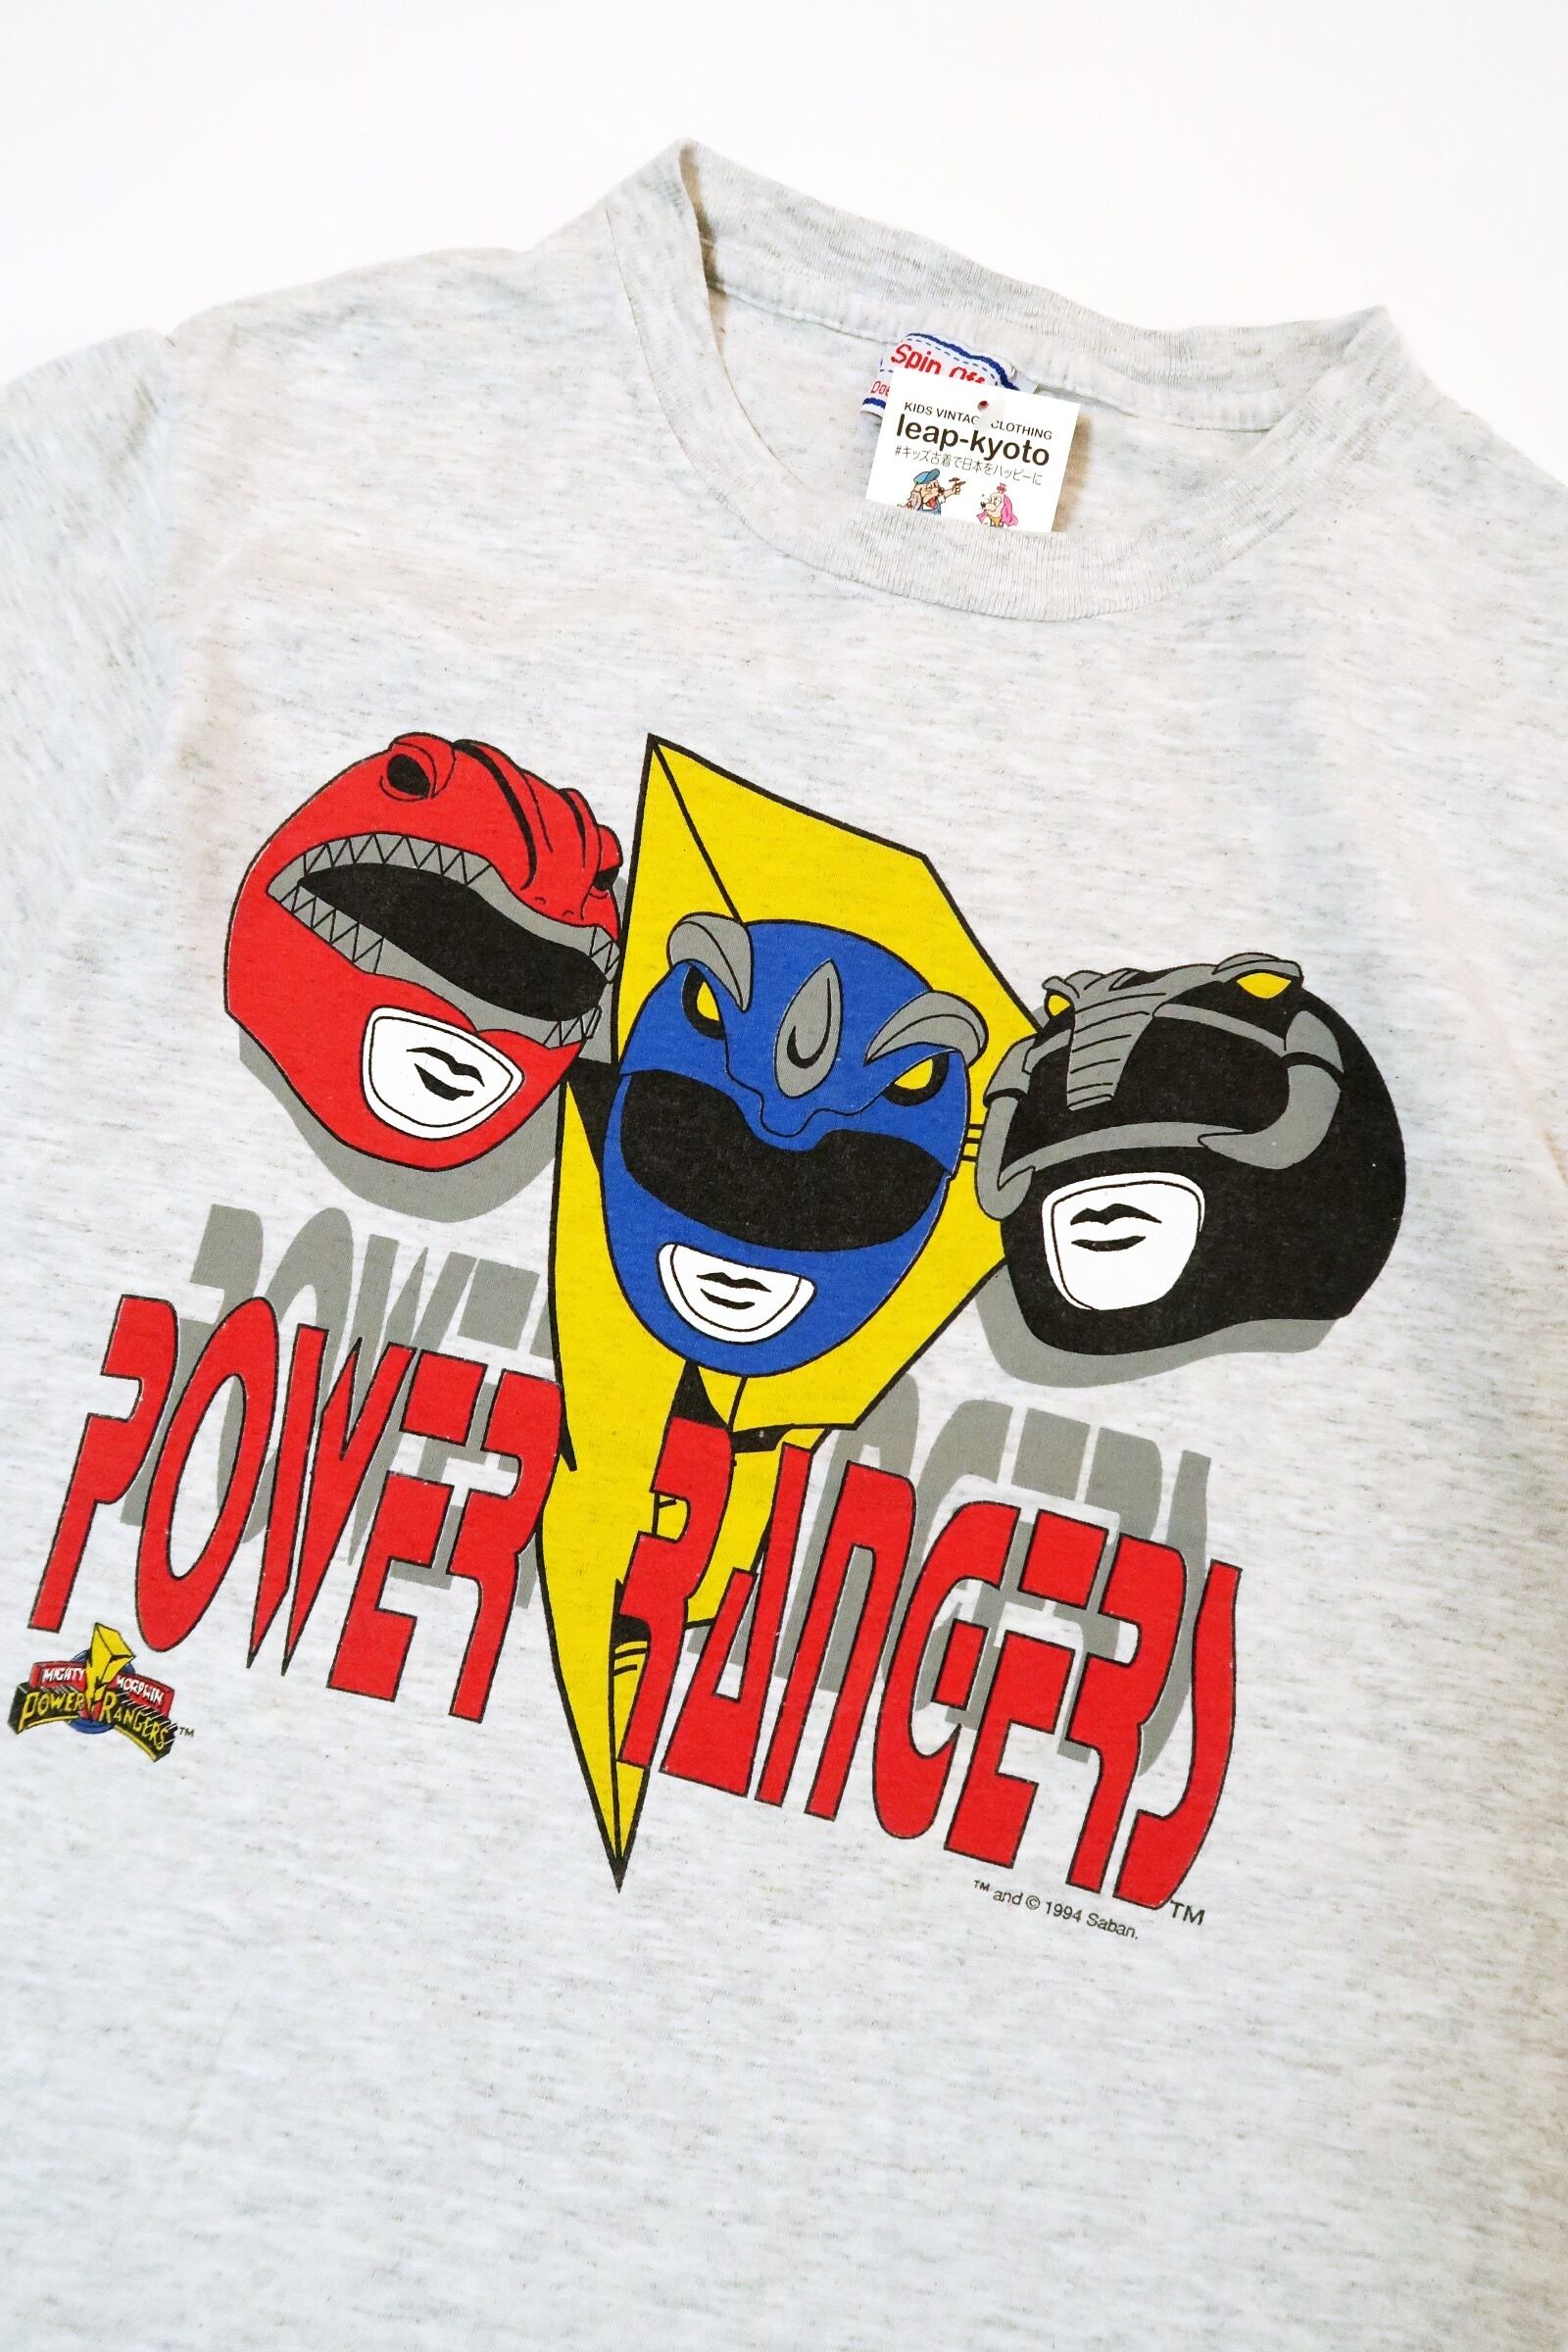 【150cm】VINTAGE90’s パワーレンジャー プリントTシャツ【3400】 | leap-kyoto powered by BASE